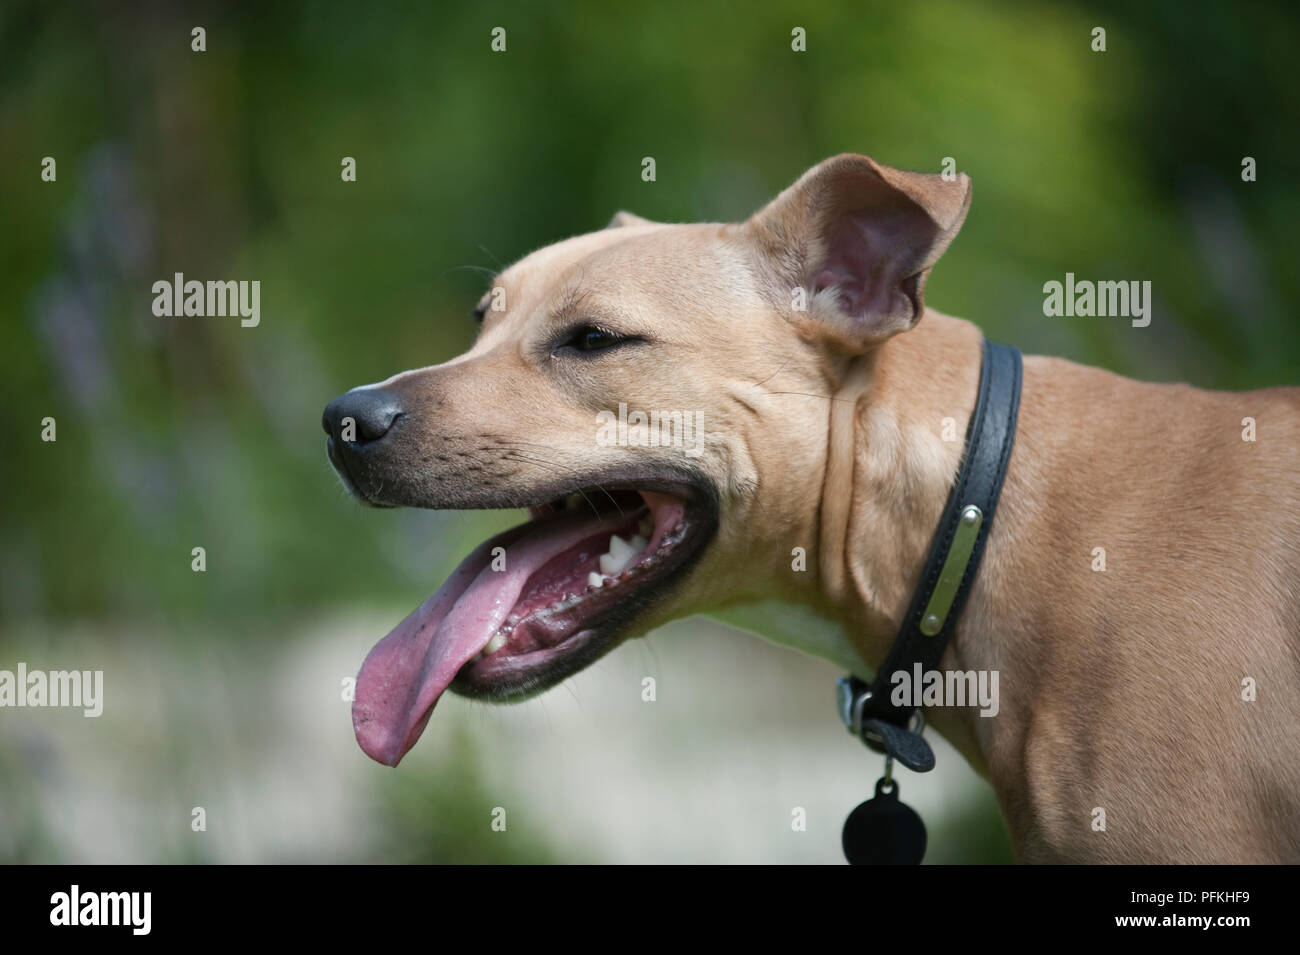 Head of mixed-breed dog wearing dog collar and dog tag, sticking out tongue, close-up, side view Stock Photo